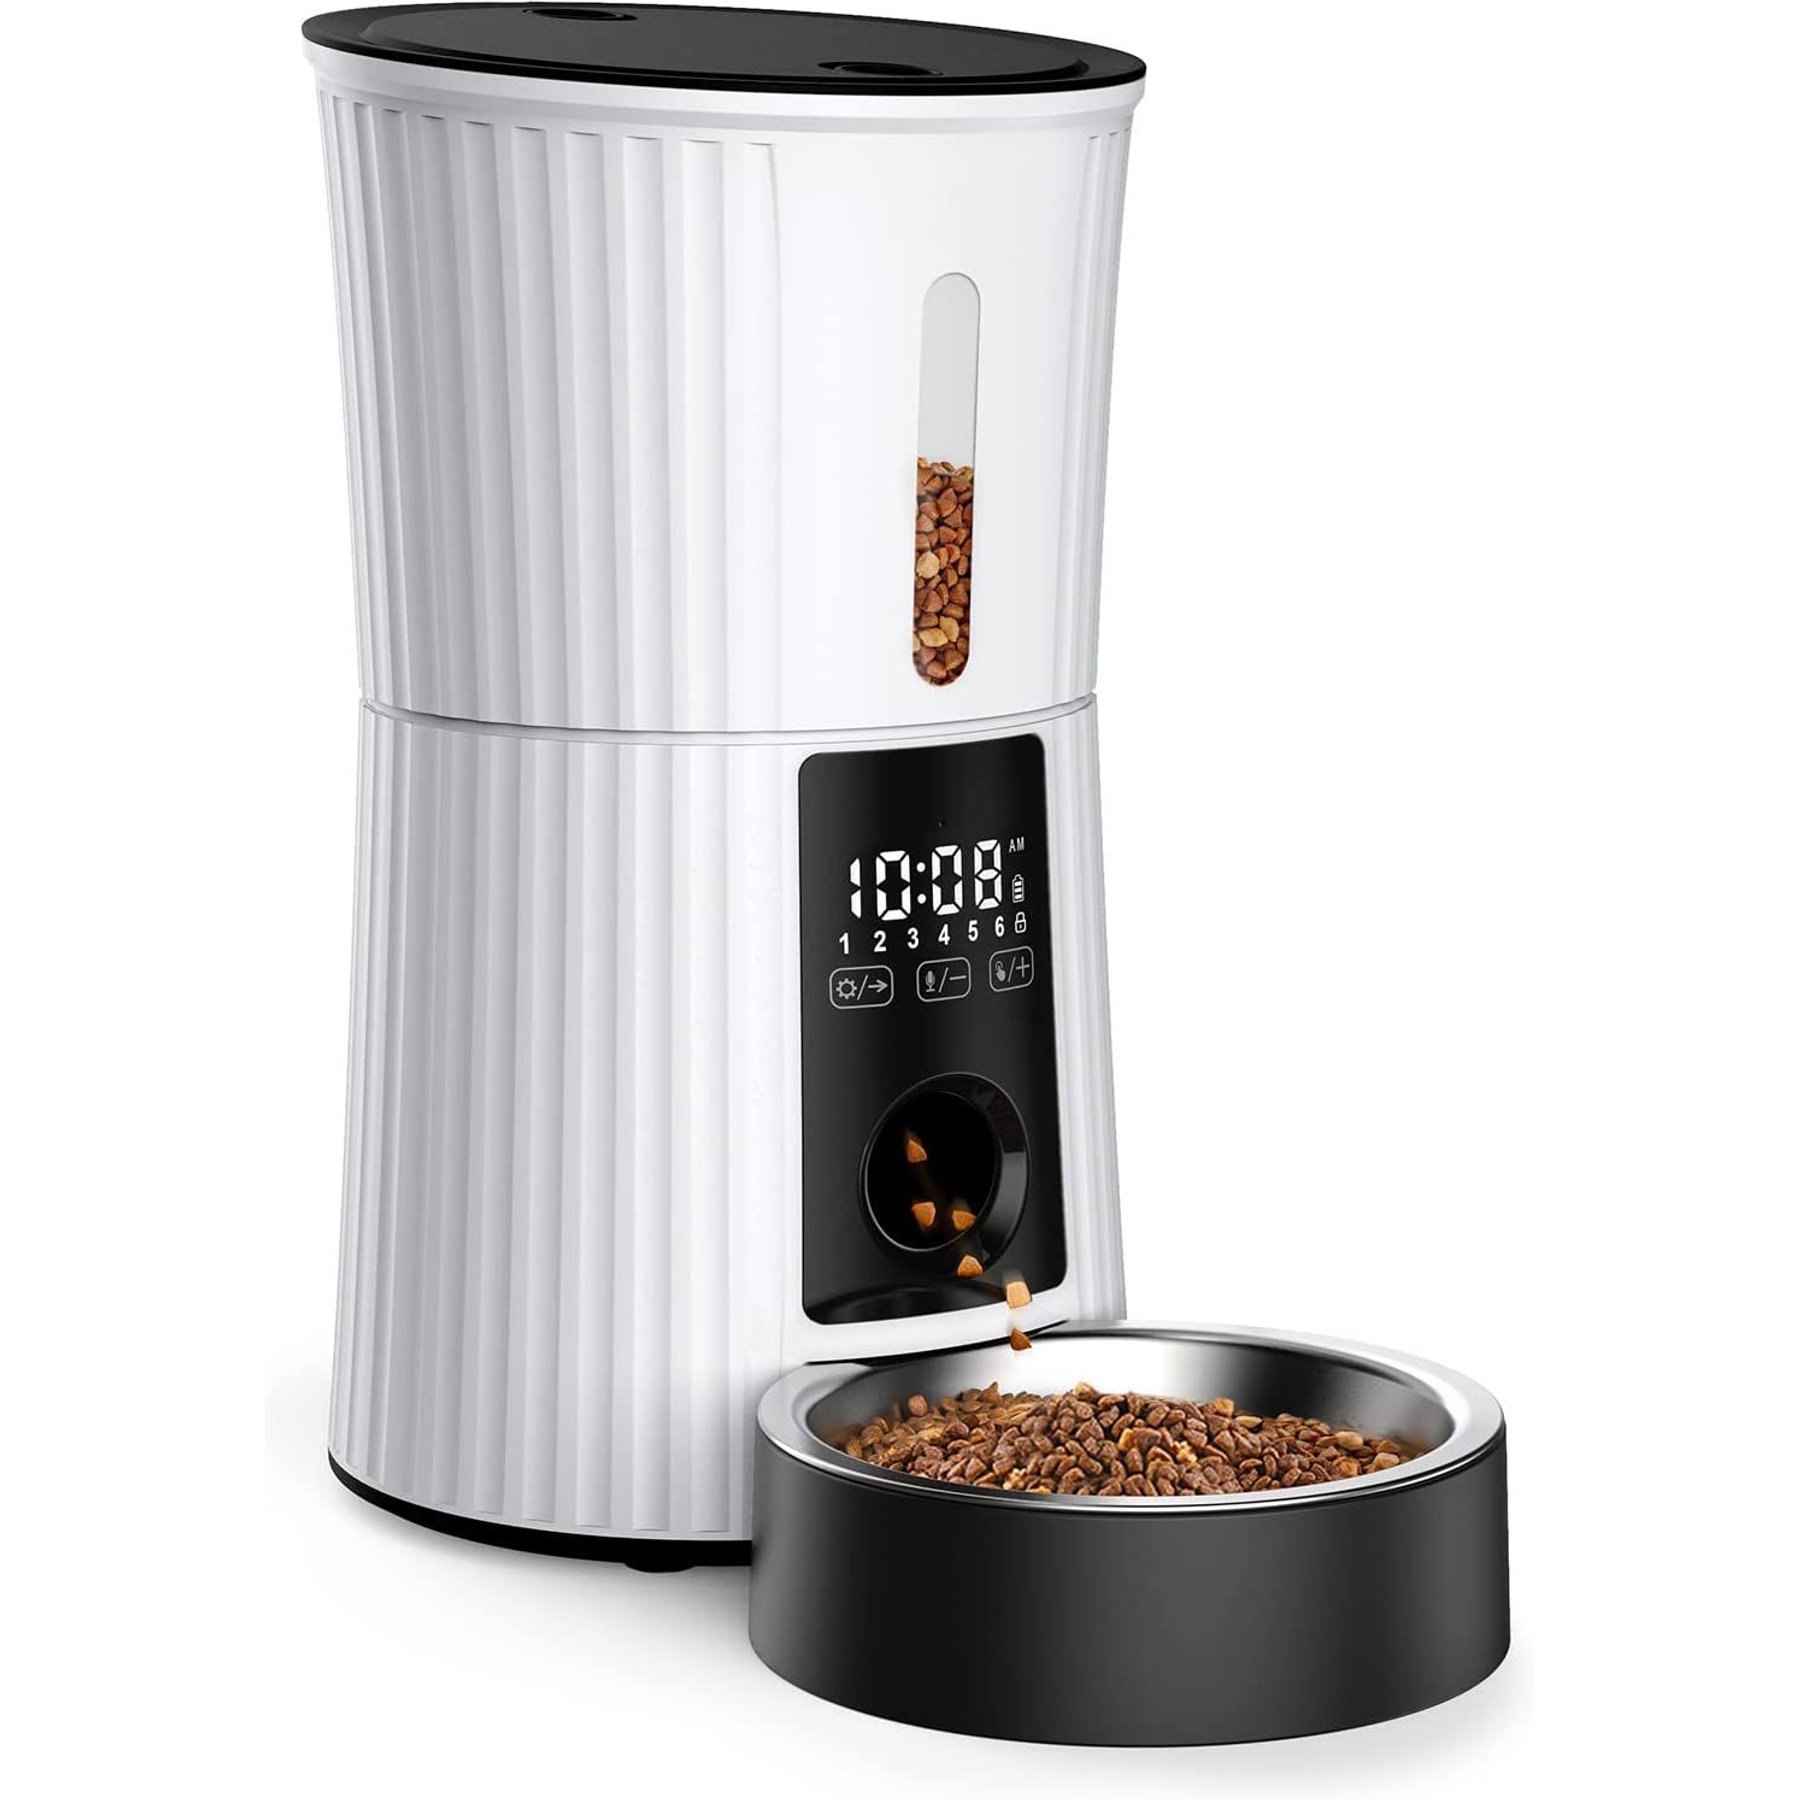 DOGNESS 2L Pet Feeder,Automatic Cat Feeder | Timed Programmable Auto Pet  Dog Food Dispenser Feeder for Kitten Puppy - Easy Portion Control,Voice